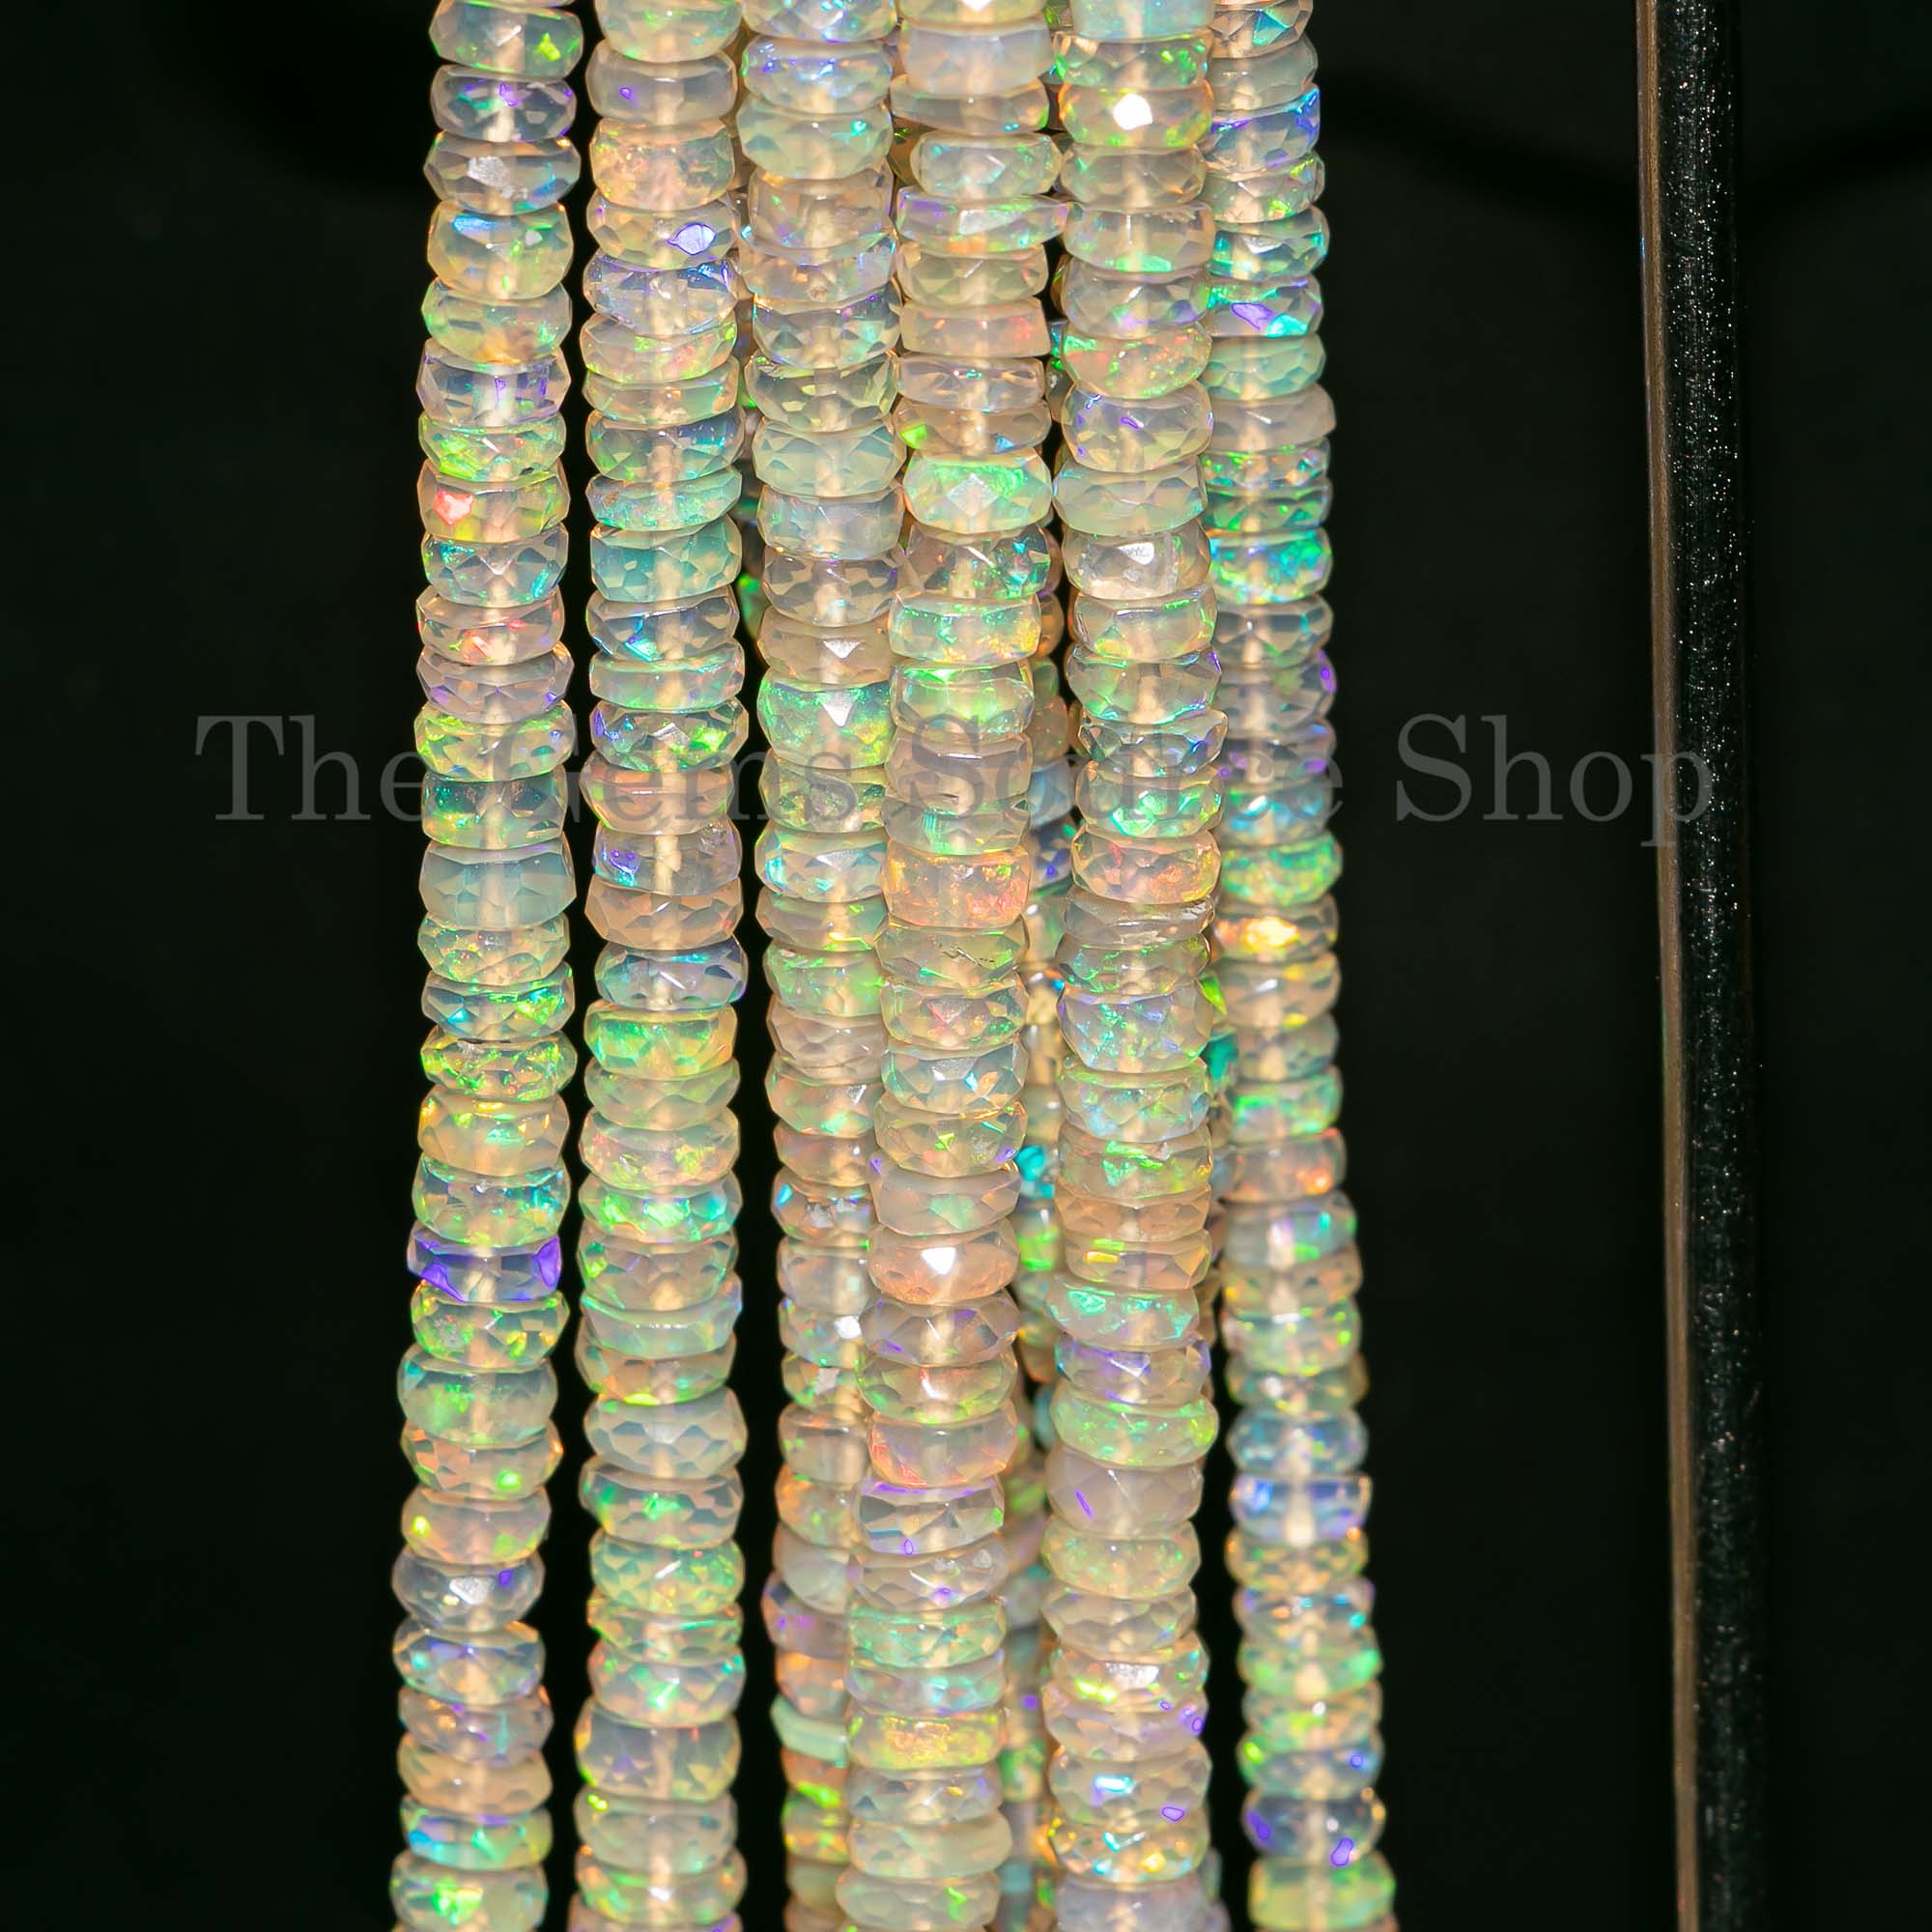 Natural Ethiopian Opal Faceted Rondelle Beads, Ethiopian Opal Beads, Opal Tyre Beads, Fire Opal Beads,